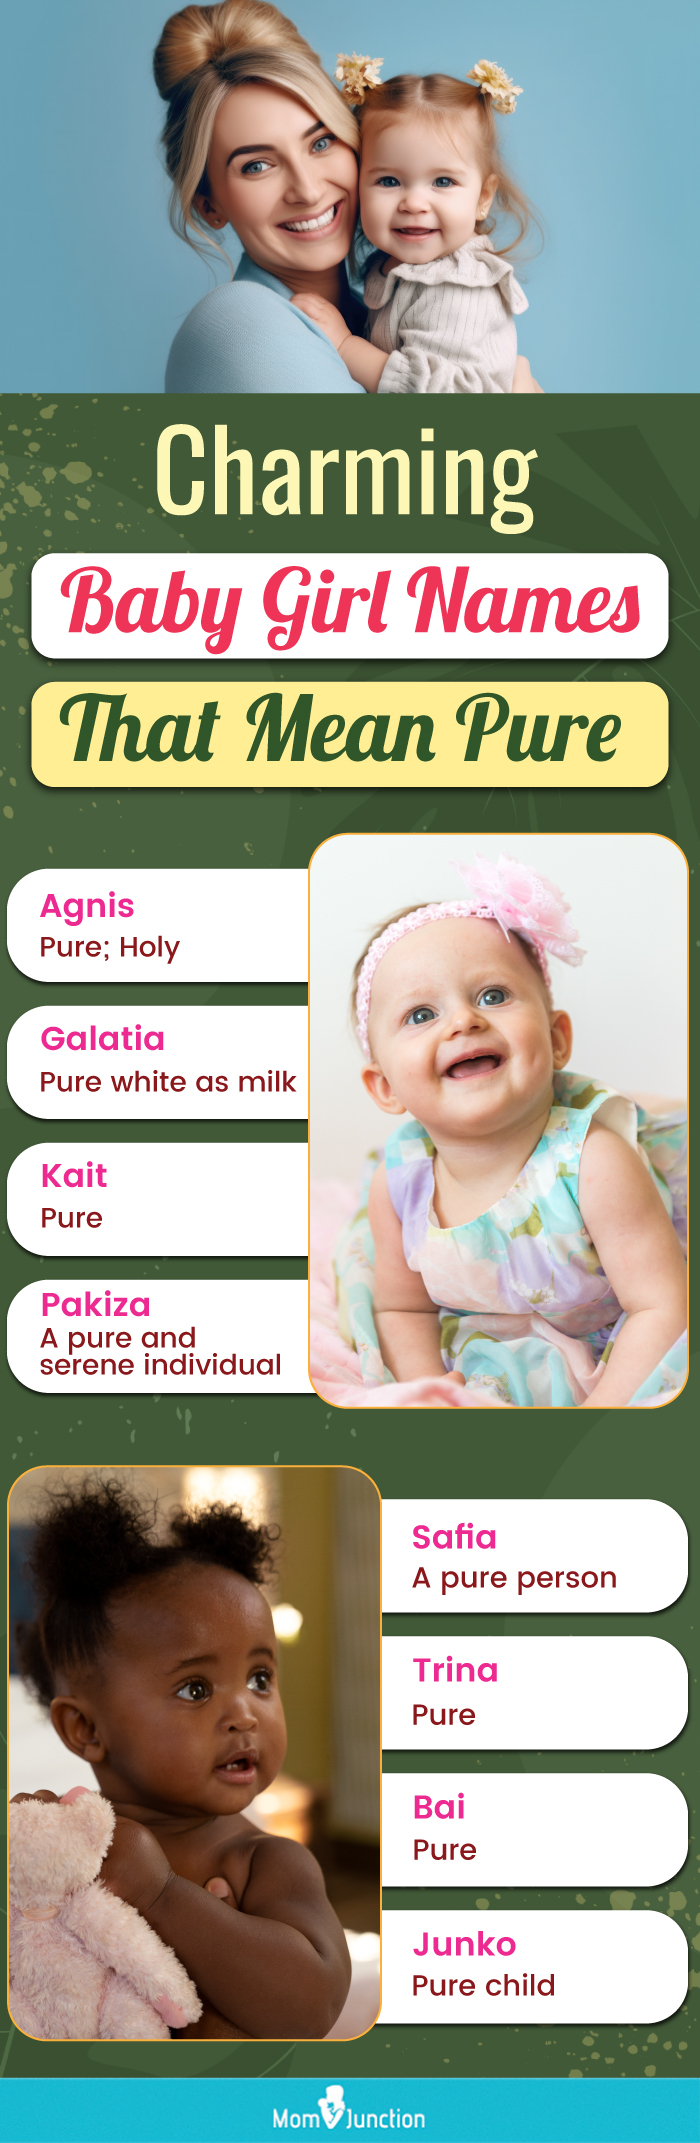 charming baby girl names that mean pure (infographic)